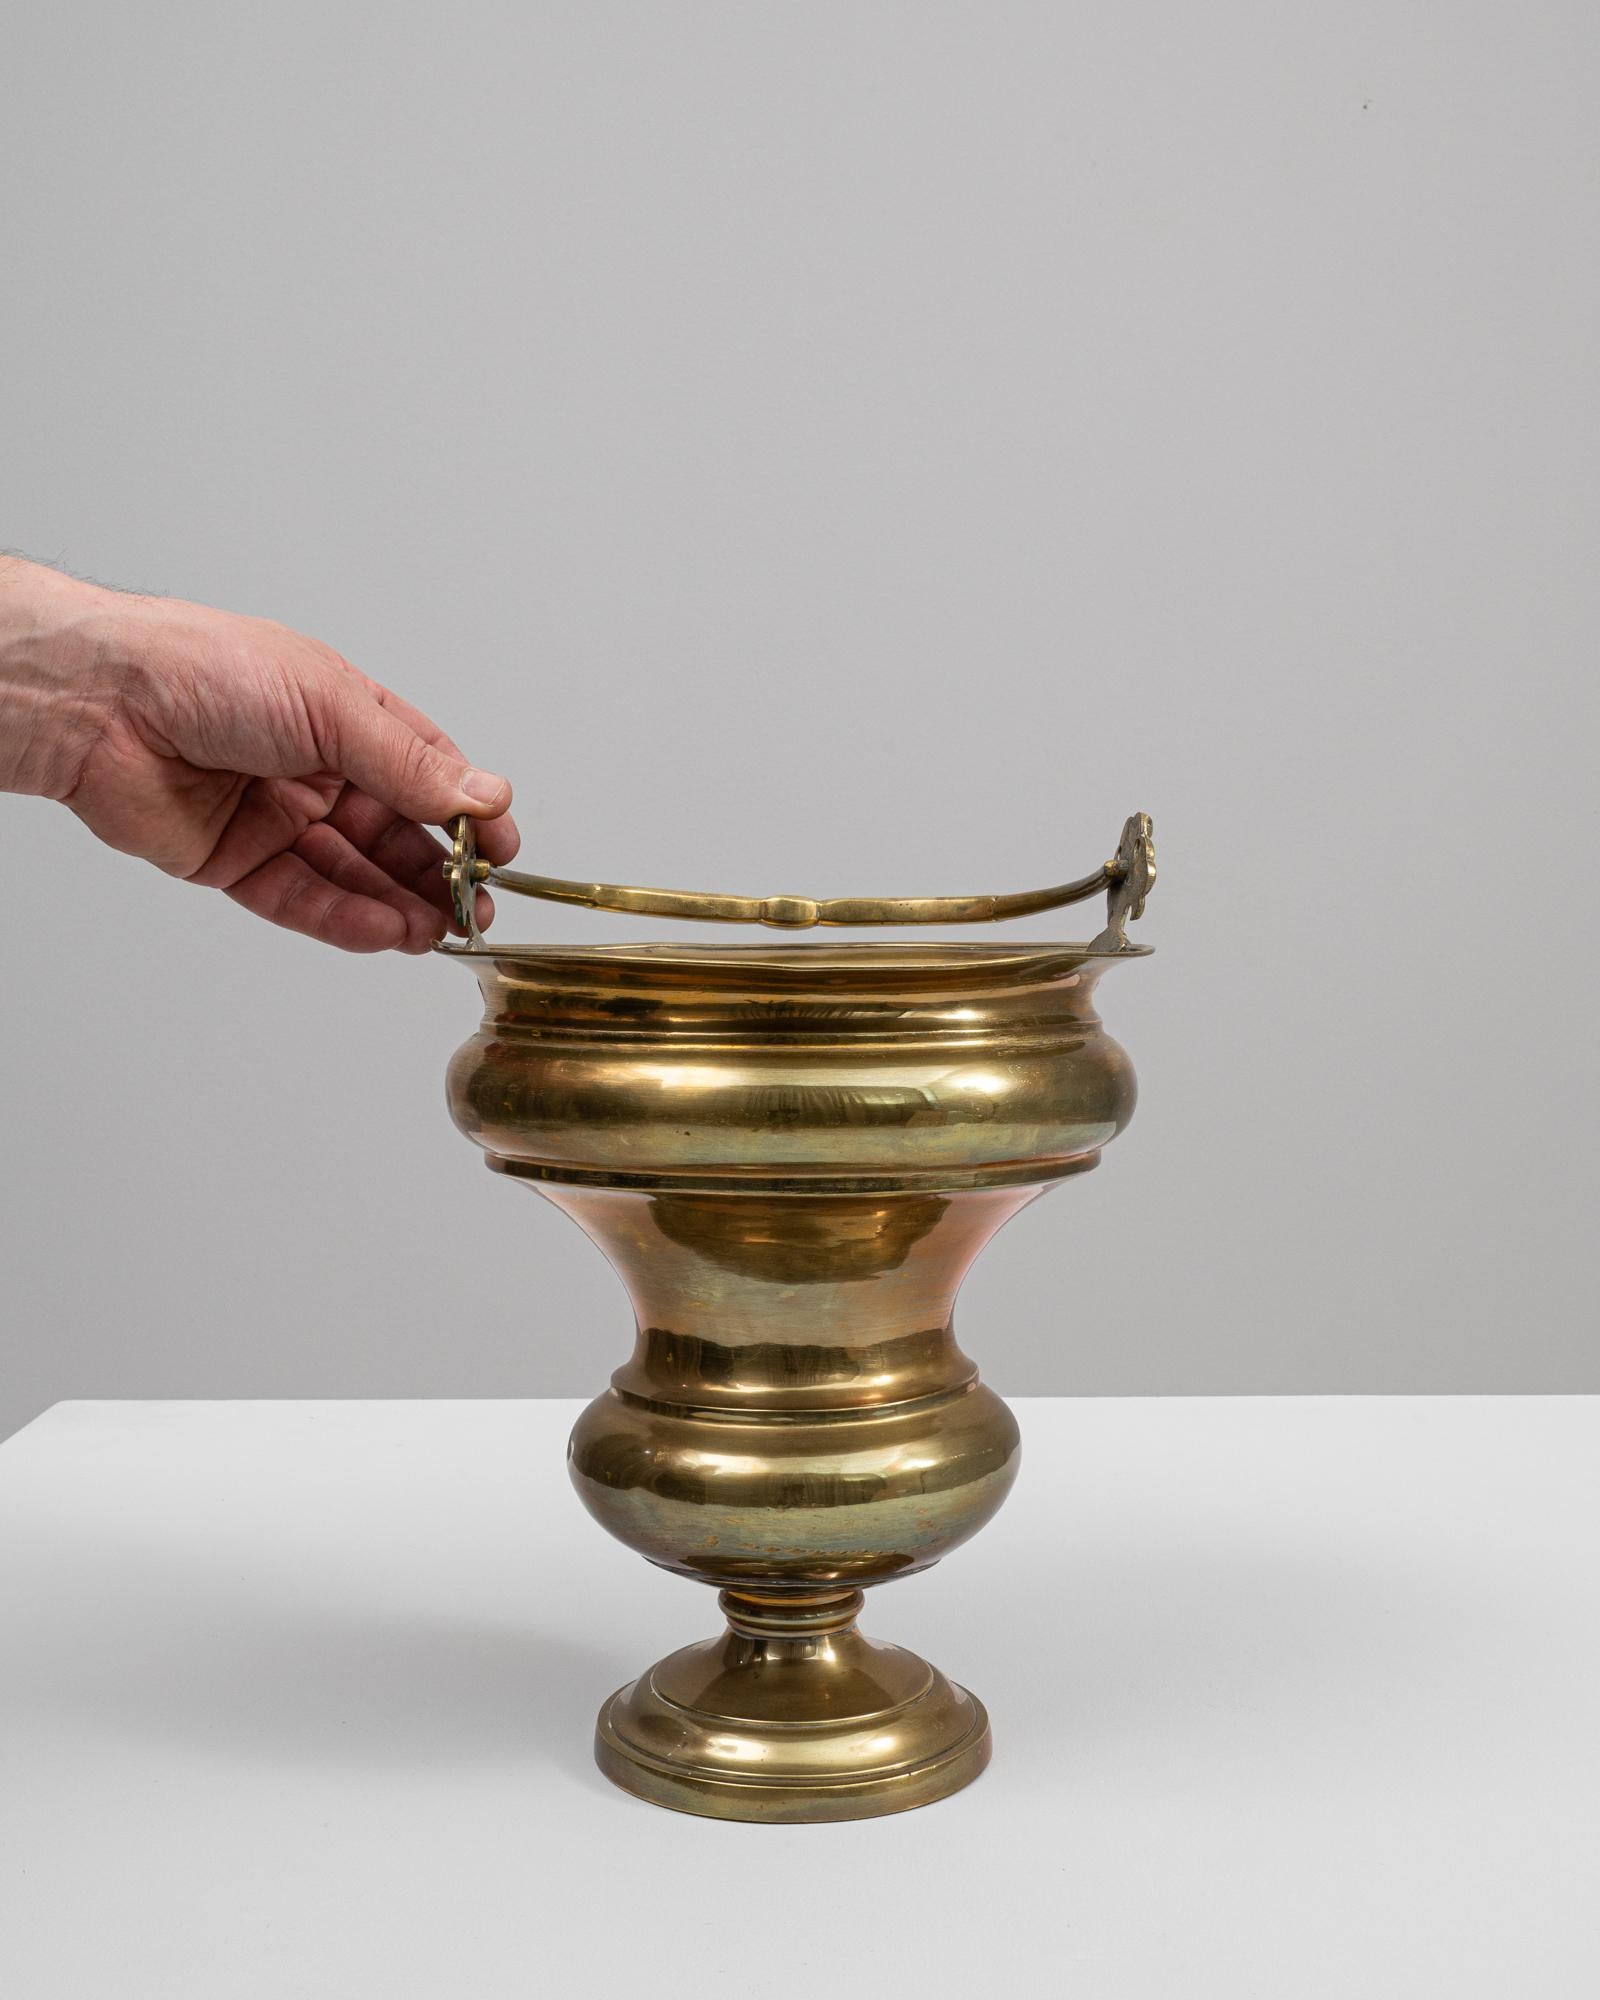 This 19th-century French brass ice bucket is a marvelous relic of elegance. Crafted from lustrous brass, it features a classic silhouette with a banded design adding a touch of sophistication to its shape. The gracefully arched handle is secured by